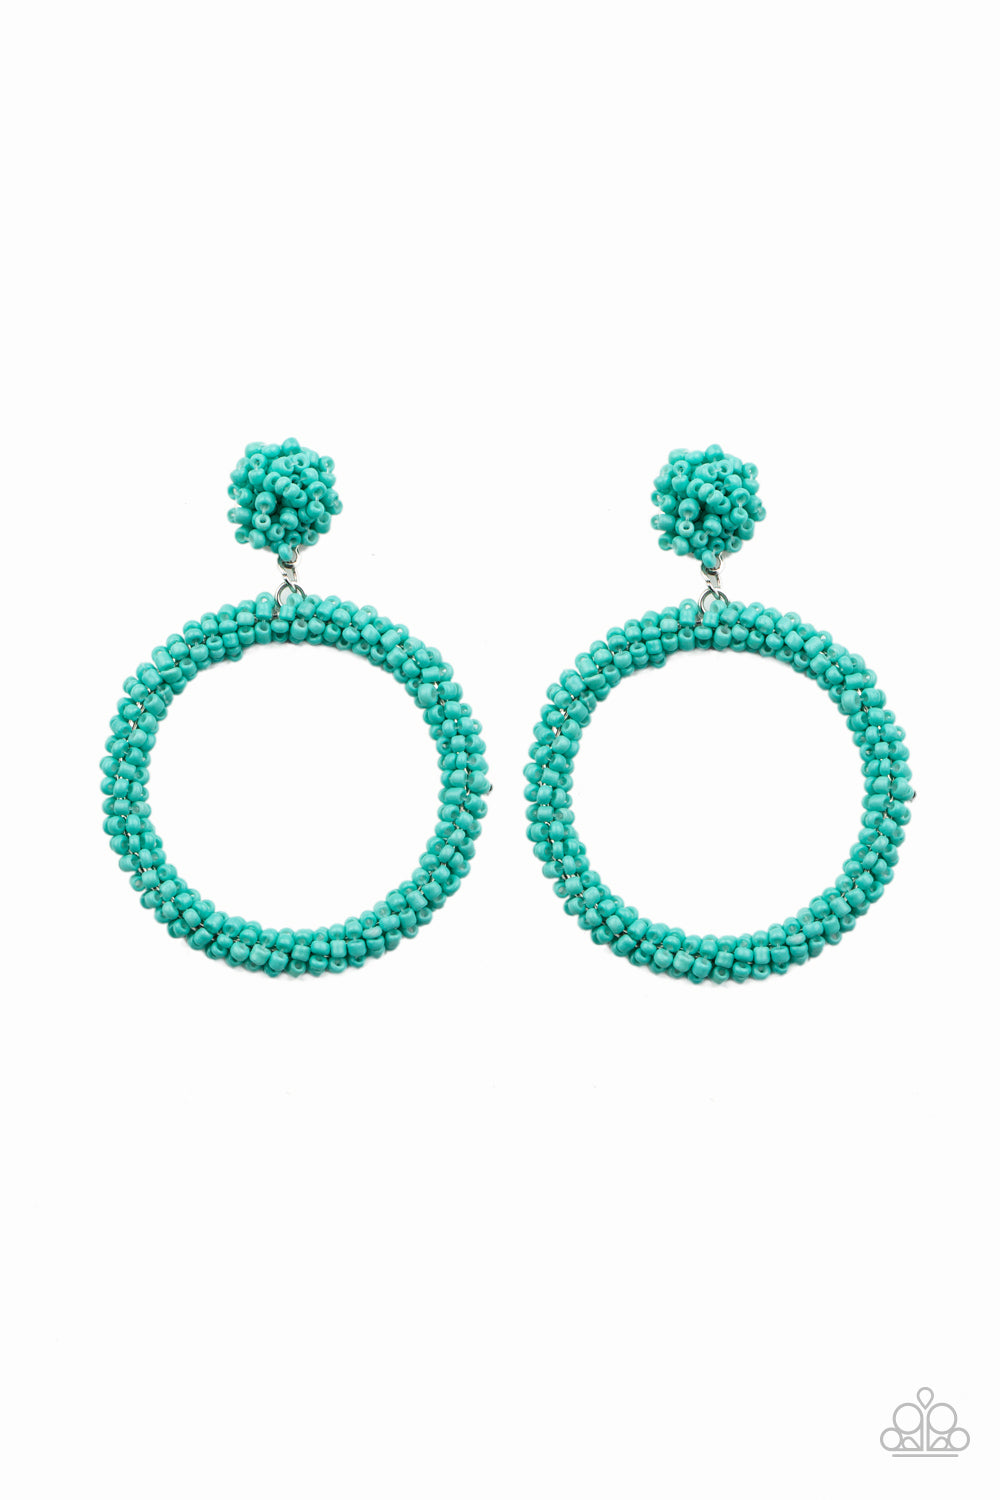 Paparazzi Be All You Can BEAD - Blue Earrings - A Finishing Touch  Jewelry Paparazzi jewelry images